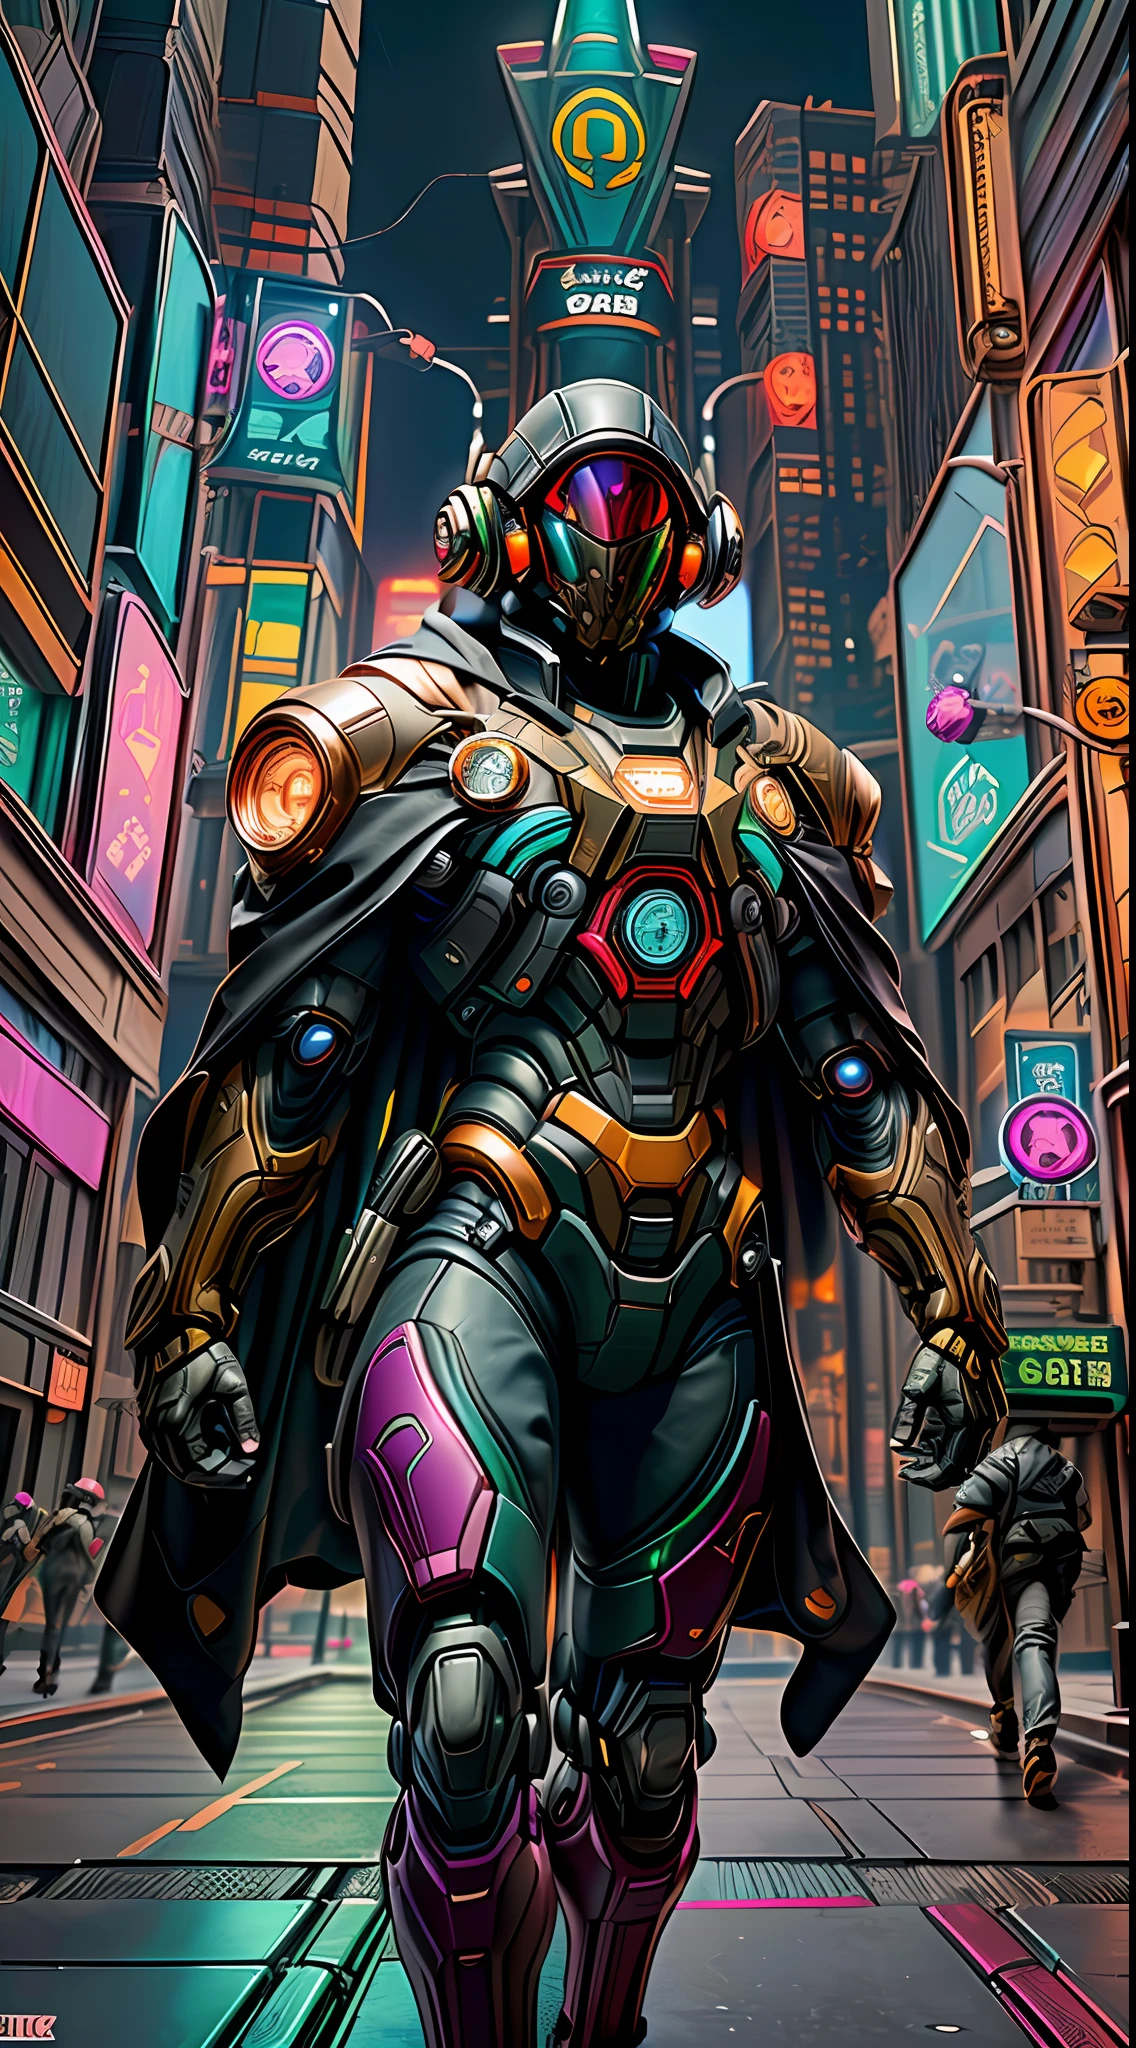 Robort Derpd Ranger working for the megacorporation Scifi, elite corporate enforcer patrolling the streets, wearing detailed multicolored cloaks cape, corporate offices, cyberpunk scene, busy street, neon lights